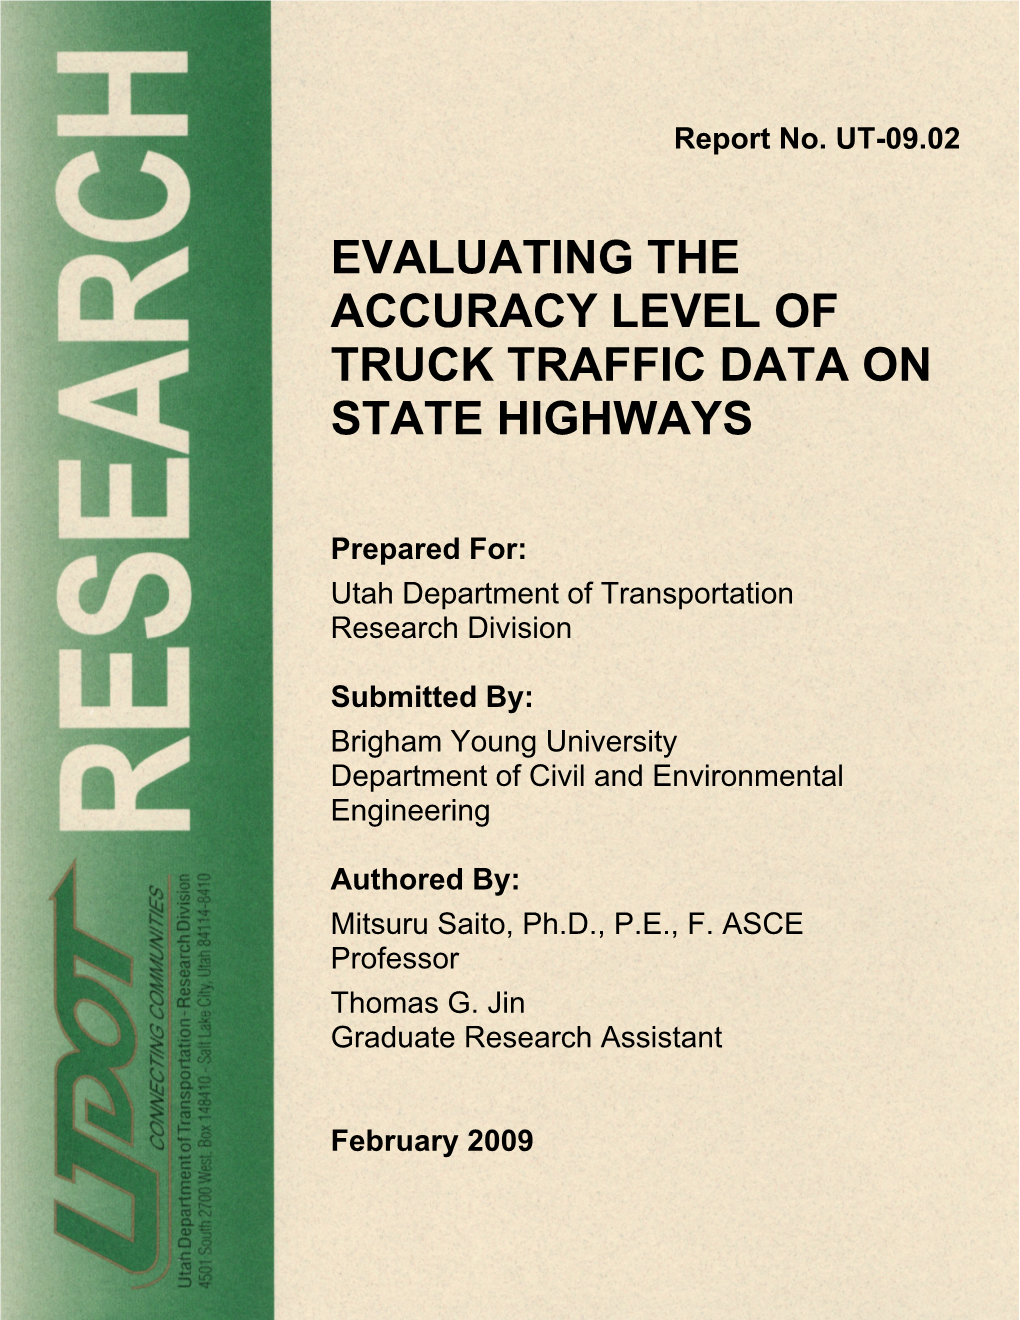 Evaluating the Accuracy Level of Truck Traffic Data on State Highways